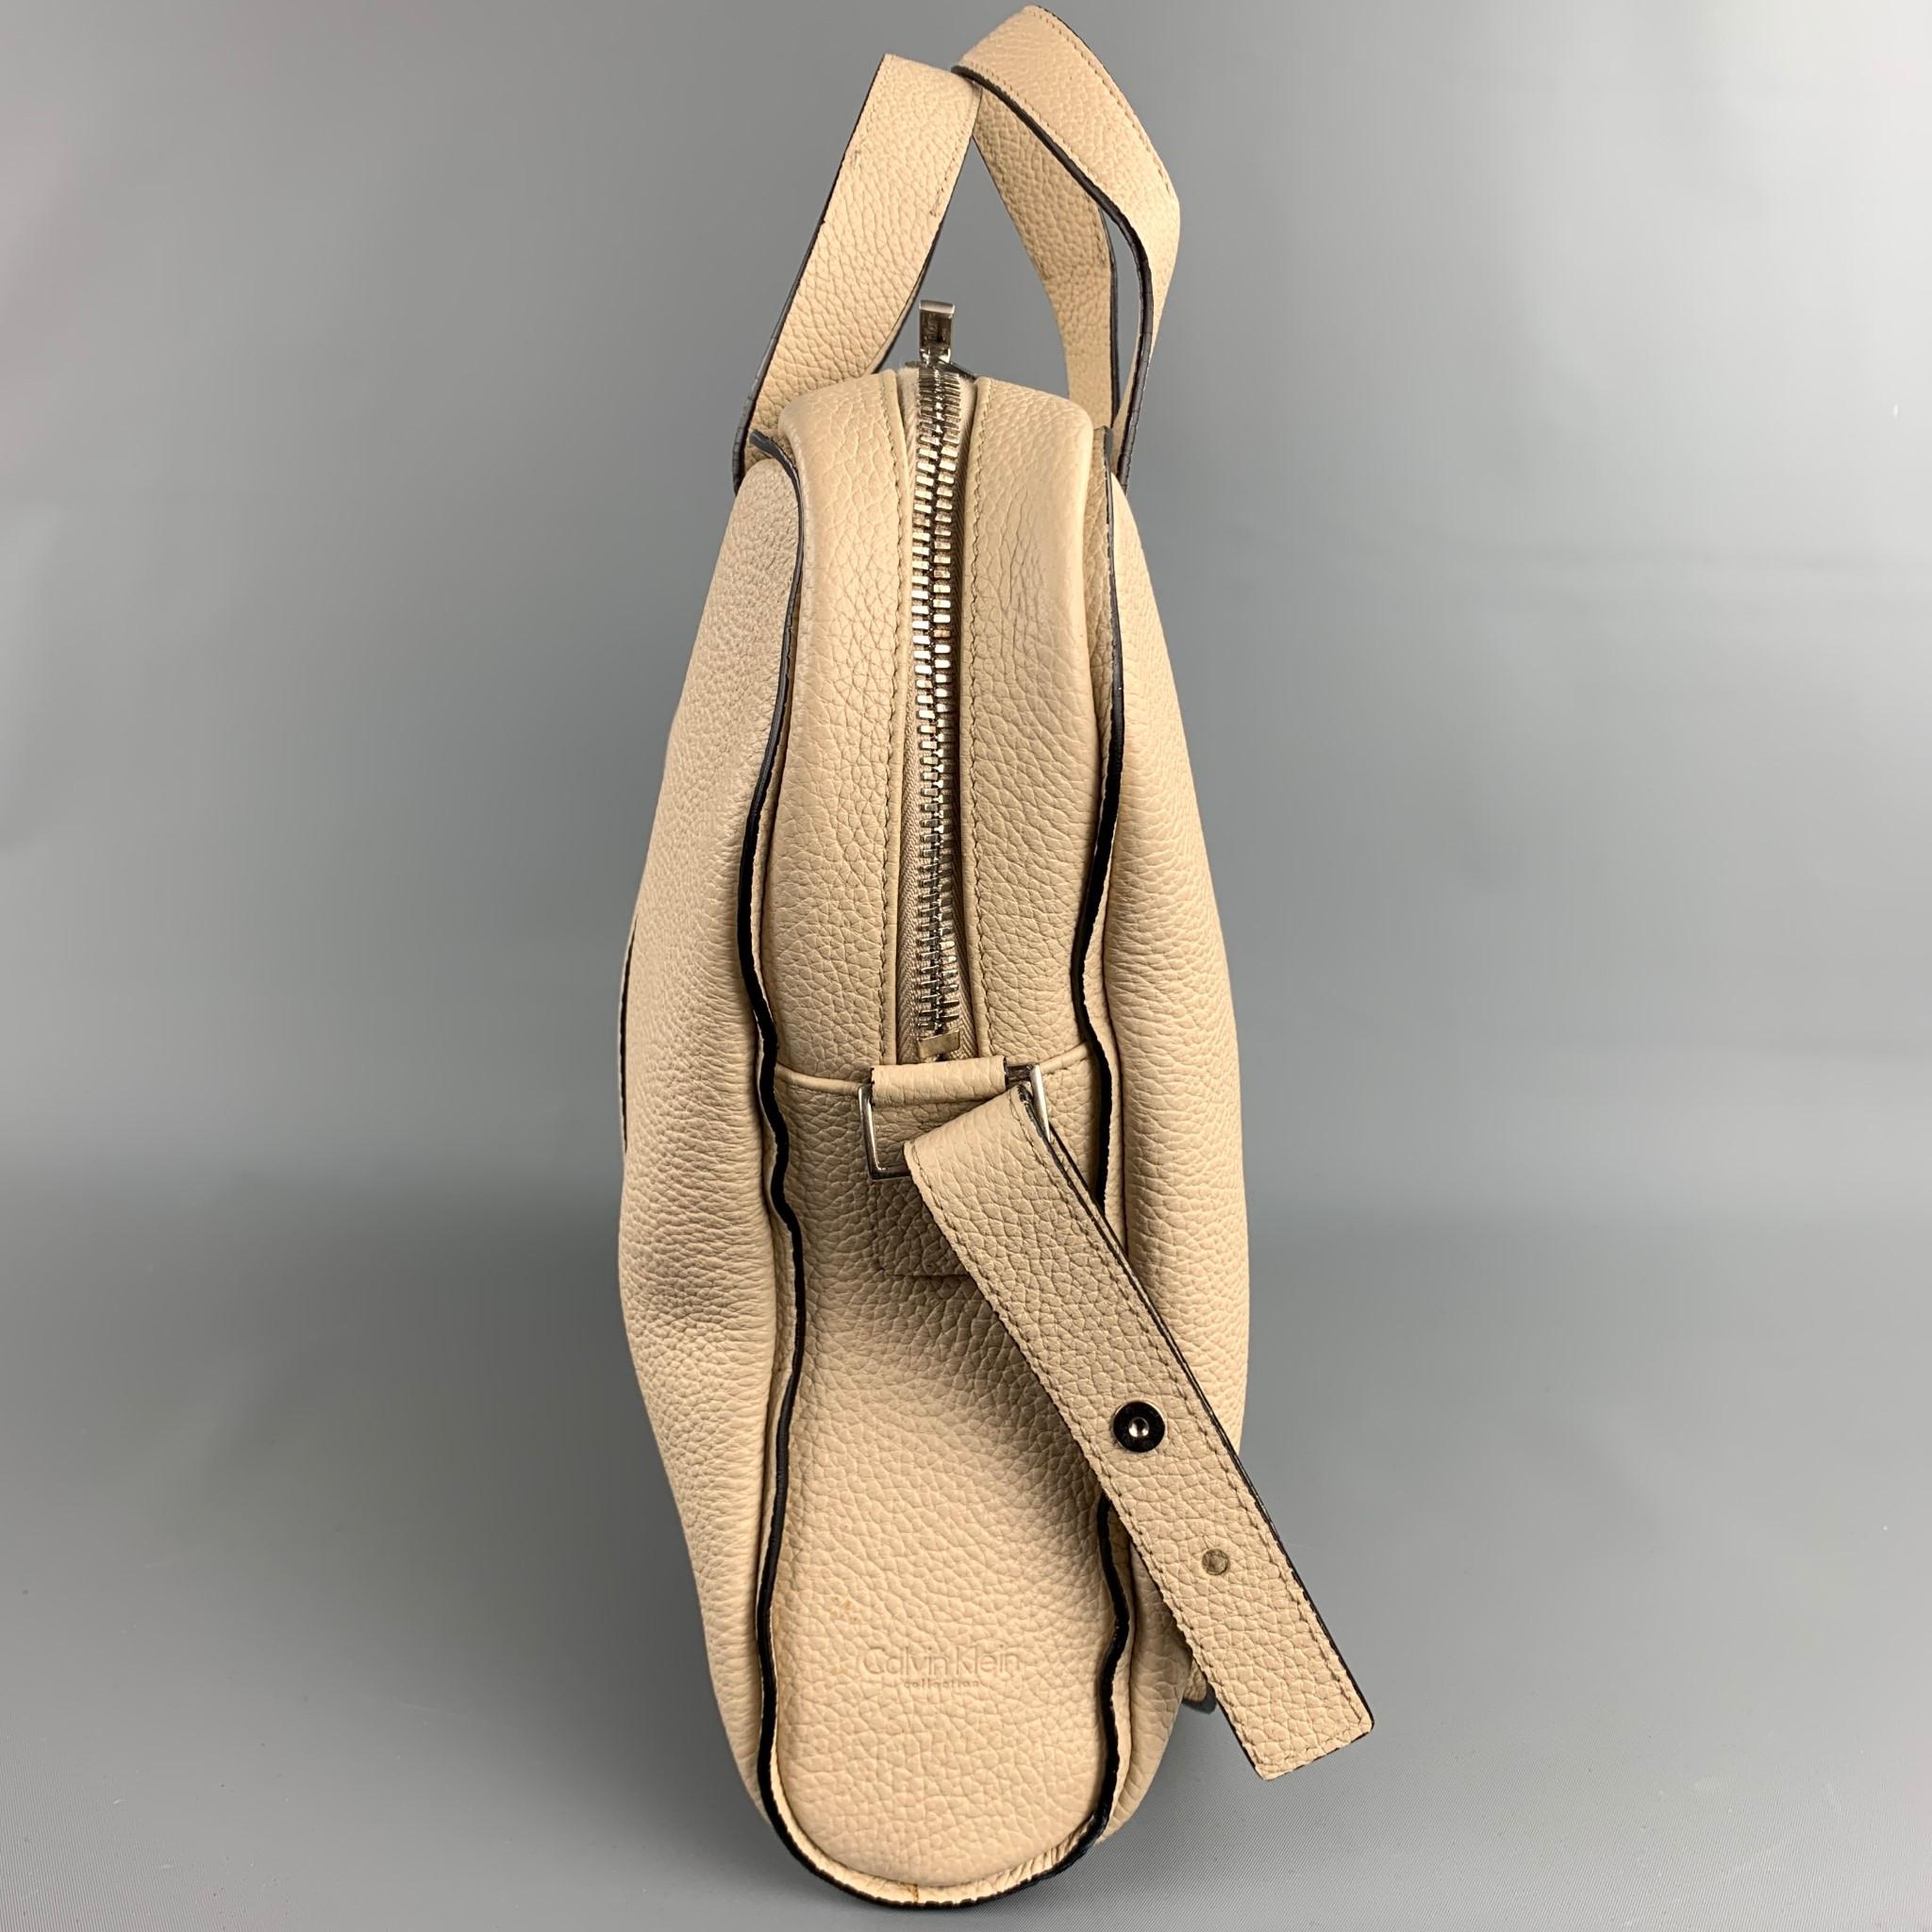 CALVIN KLEIN COLLECTION handbag comes in a beige pebble grain leather featuring a adjustable cross body strap, top handles, inner slots, and a zipper closure.

Very Good Pre-Owned Condition.

Measurements:

Length: 15 in.
Width: 3 in.
Height: 11.5